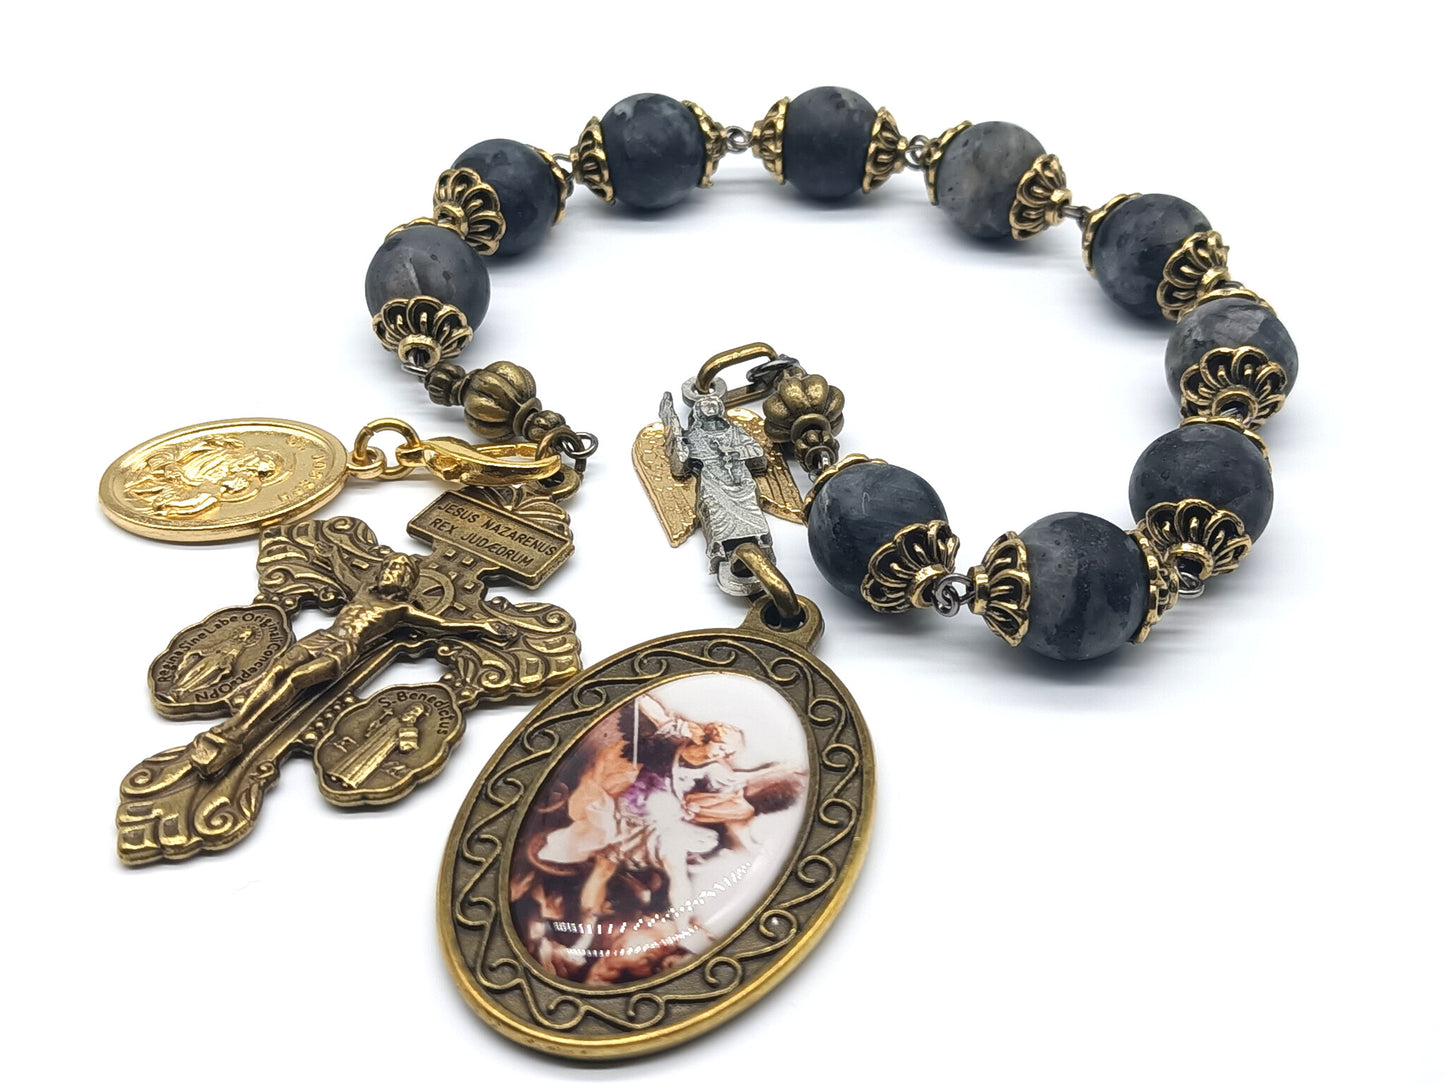 Saint Michael unique decade rosary beads with gemstone beads and bronze pardon crucifix, Saint Michael picture medal and bronze bead caps.